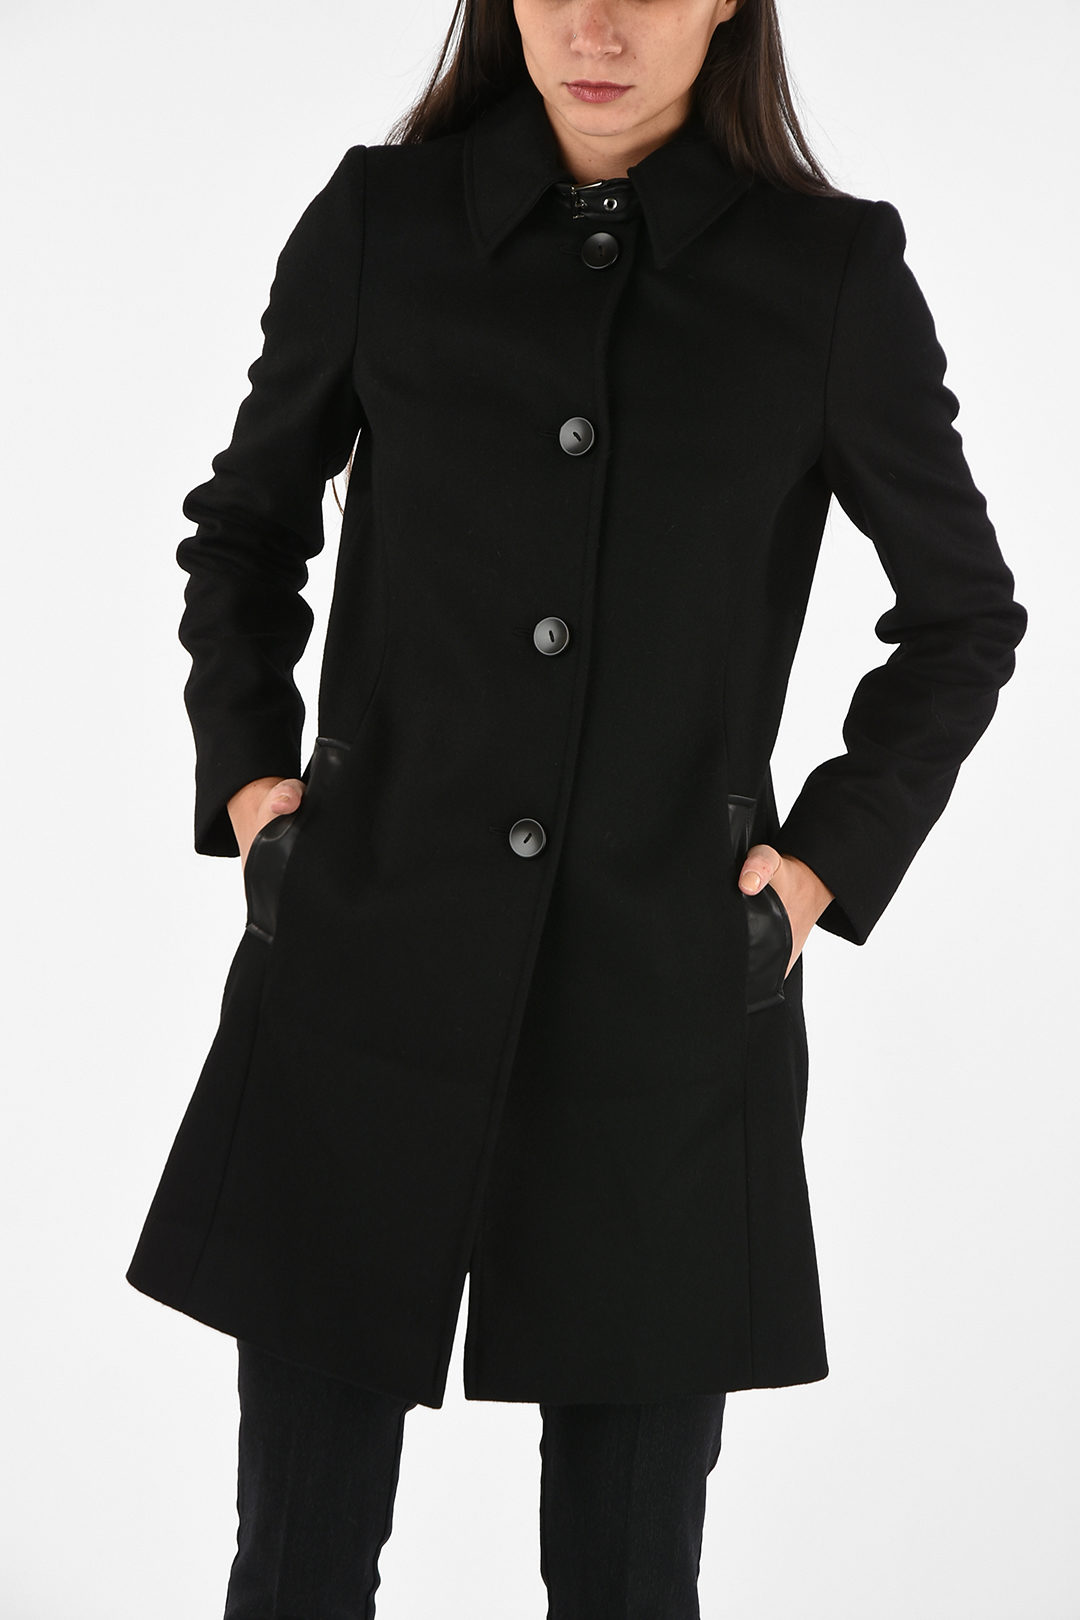 Fugtighed guiden henvise Armani ARMANI JEANS Wool and Cashmere Center Vent Coat women - Glamood  Outlet